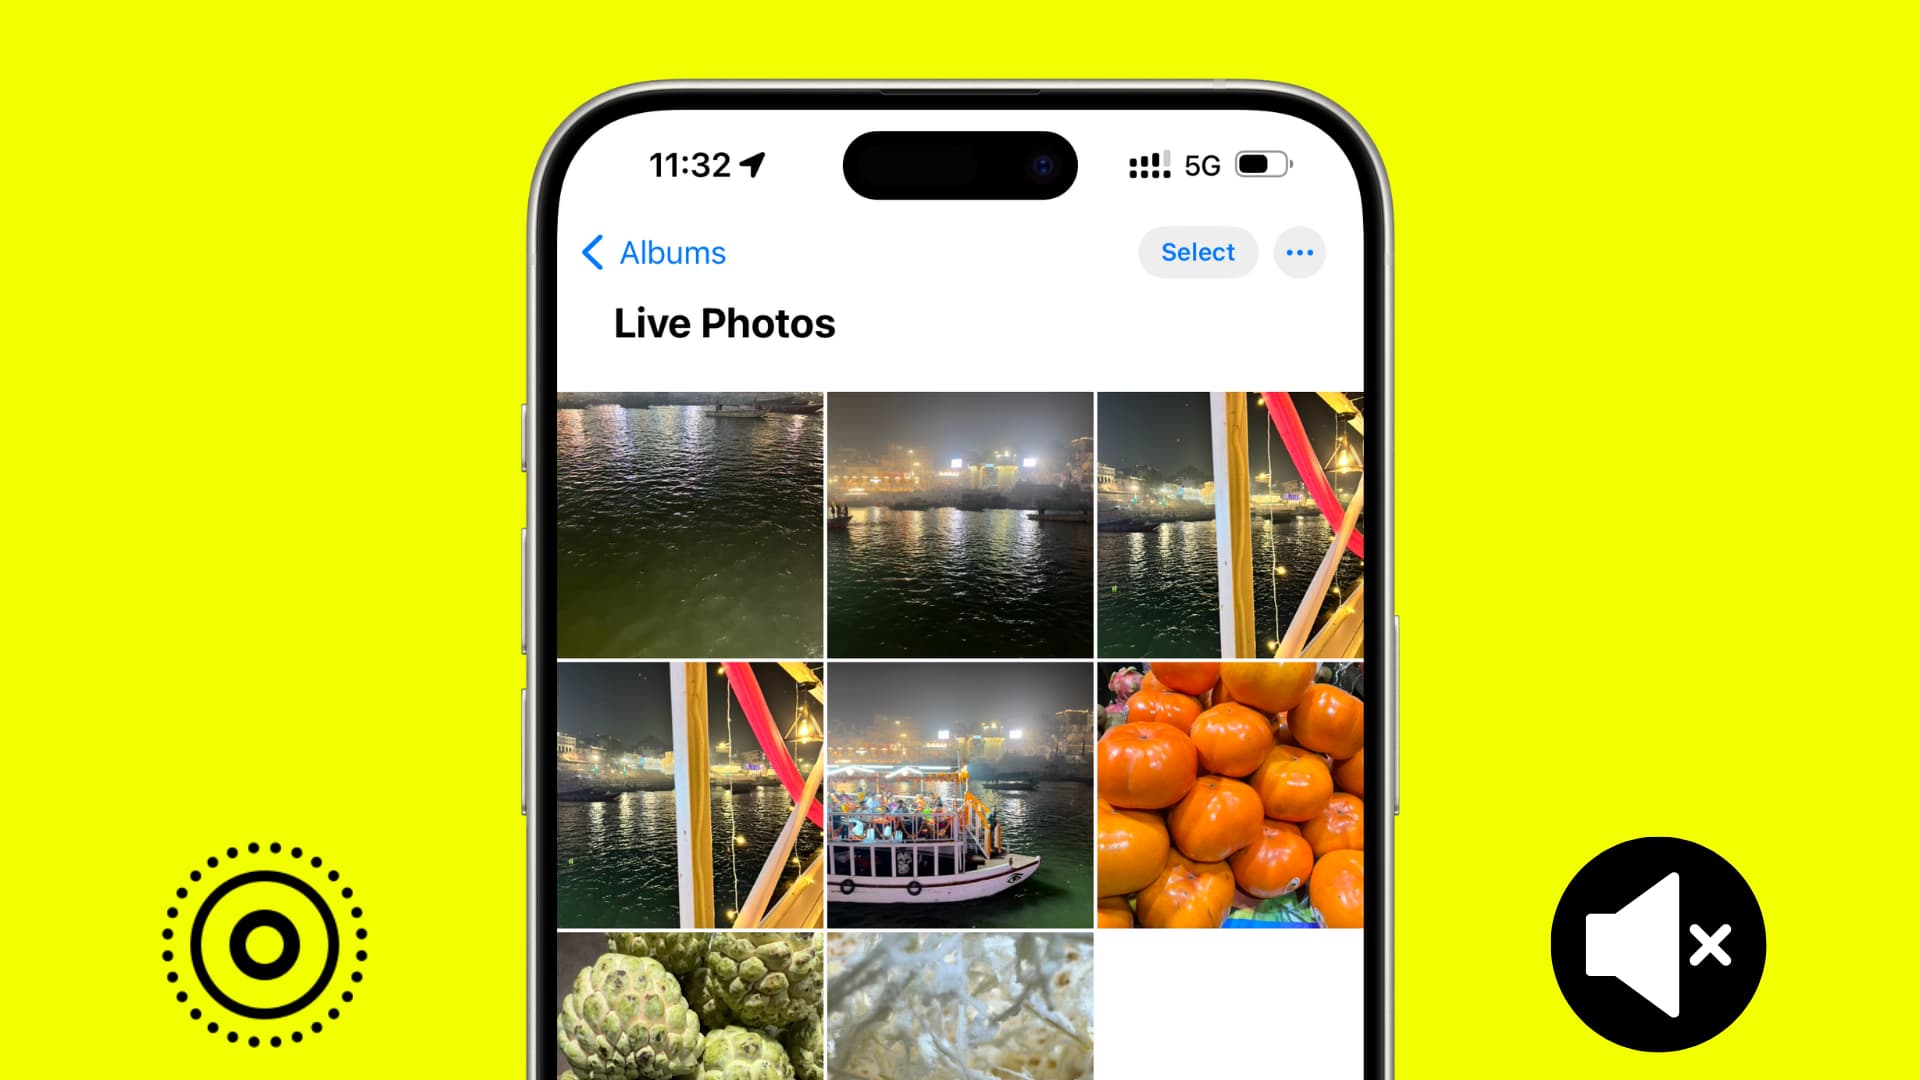 How to turn off audio from Live Photos on iPhone or Mac